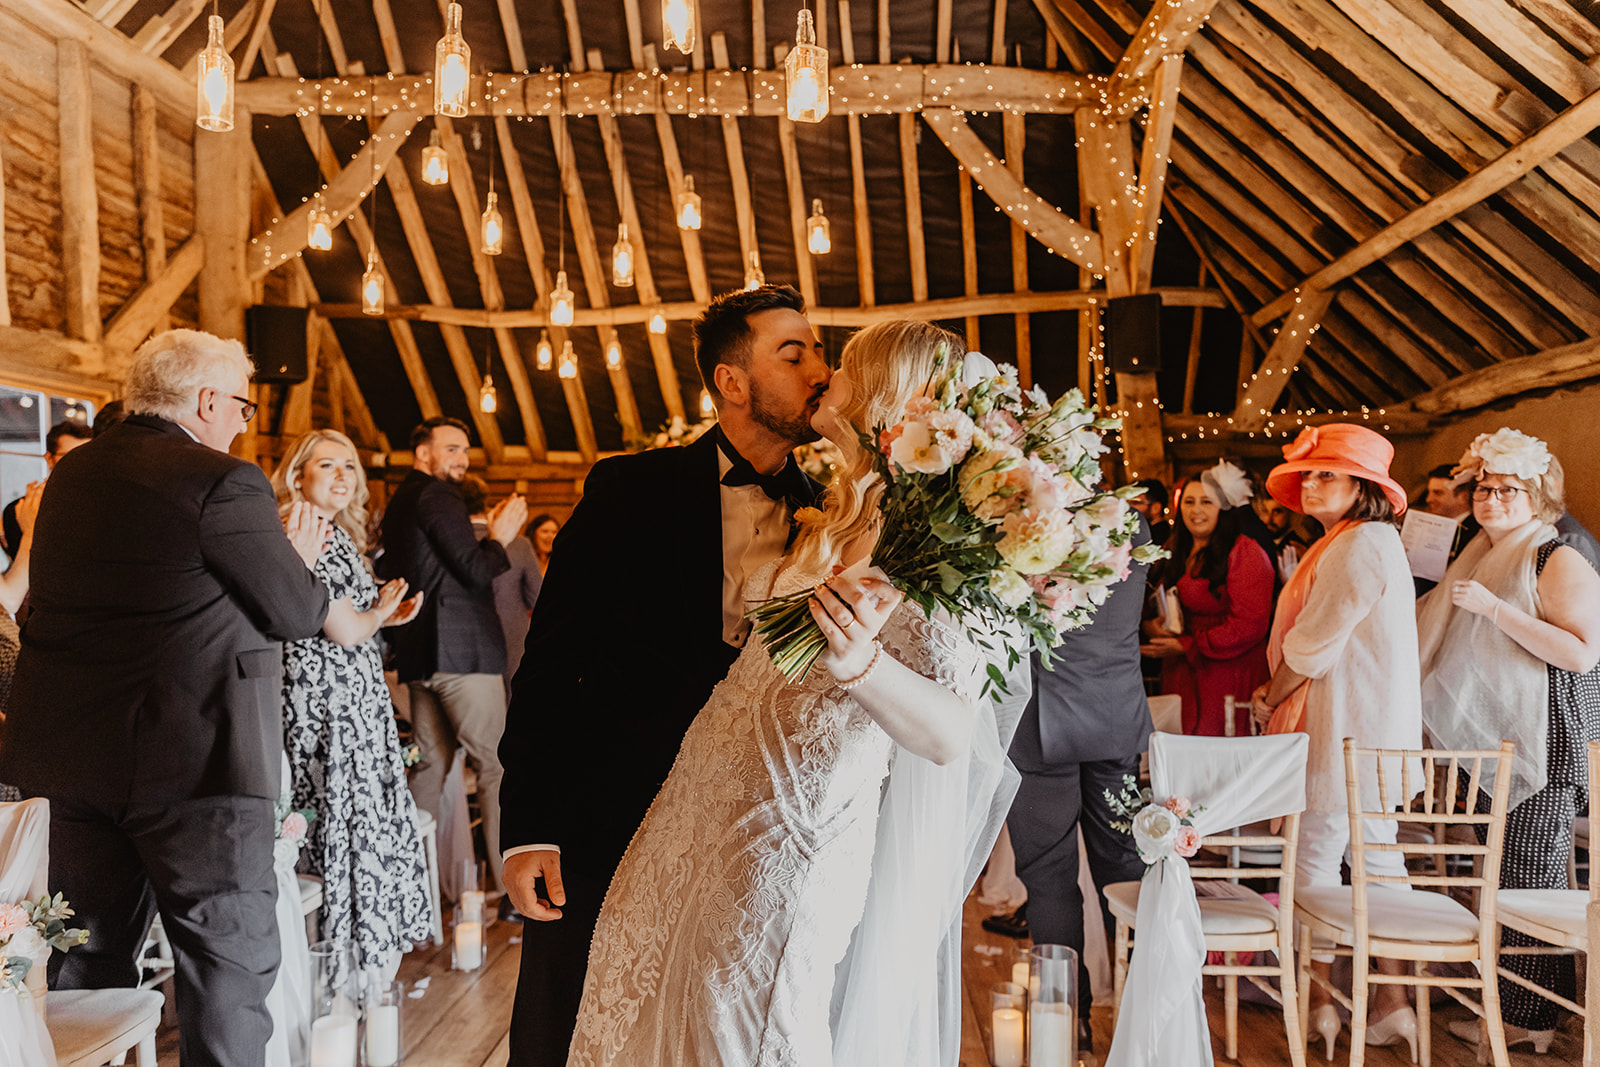 Bride and groom walk down the aisle at a Southlands barn wedding, Sussex. Photo by OliveJoy Photography.